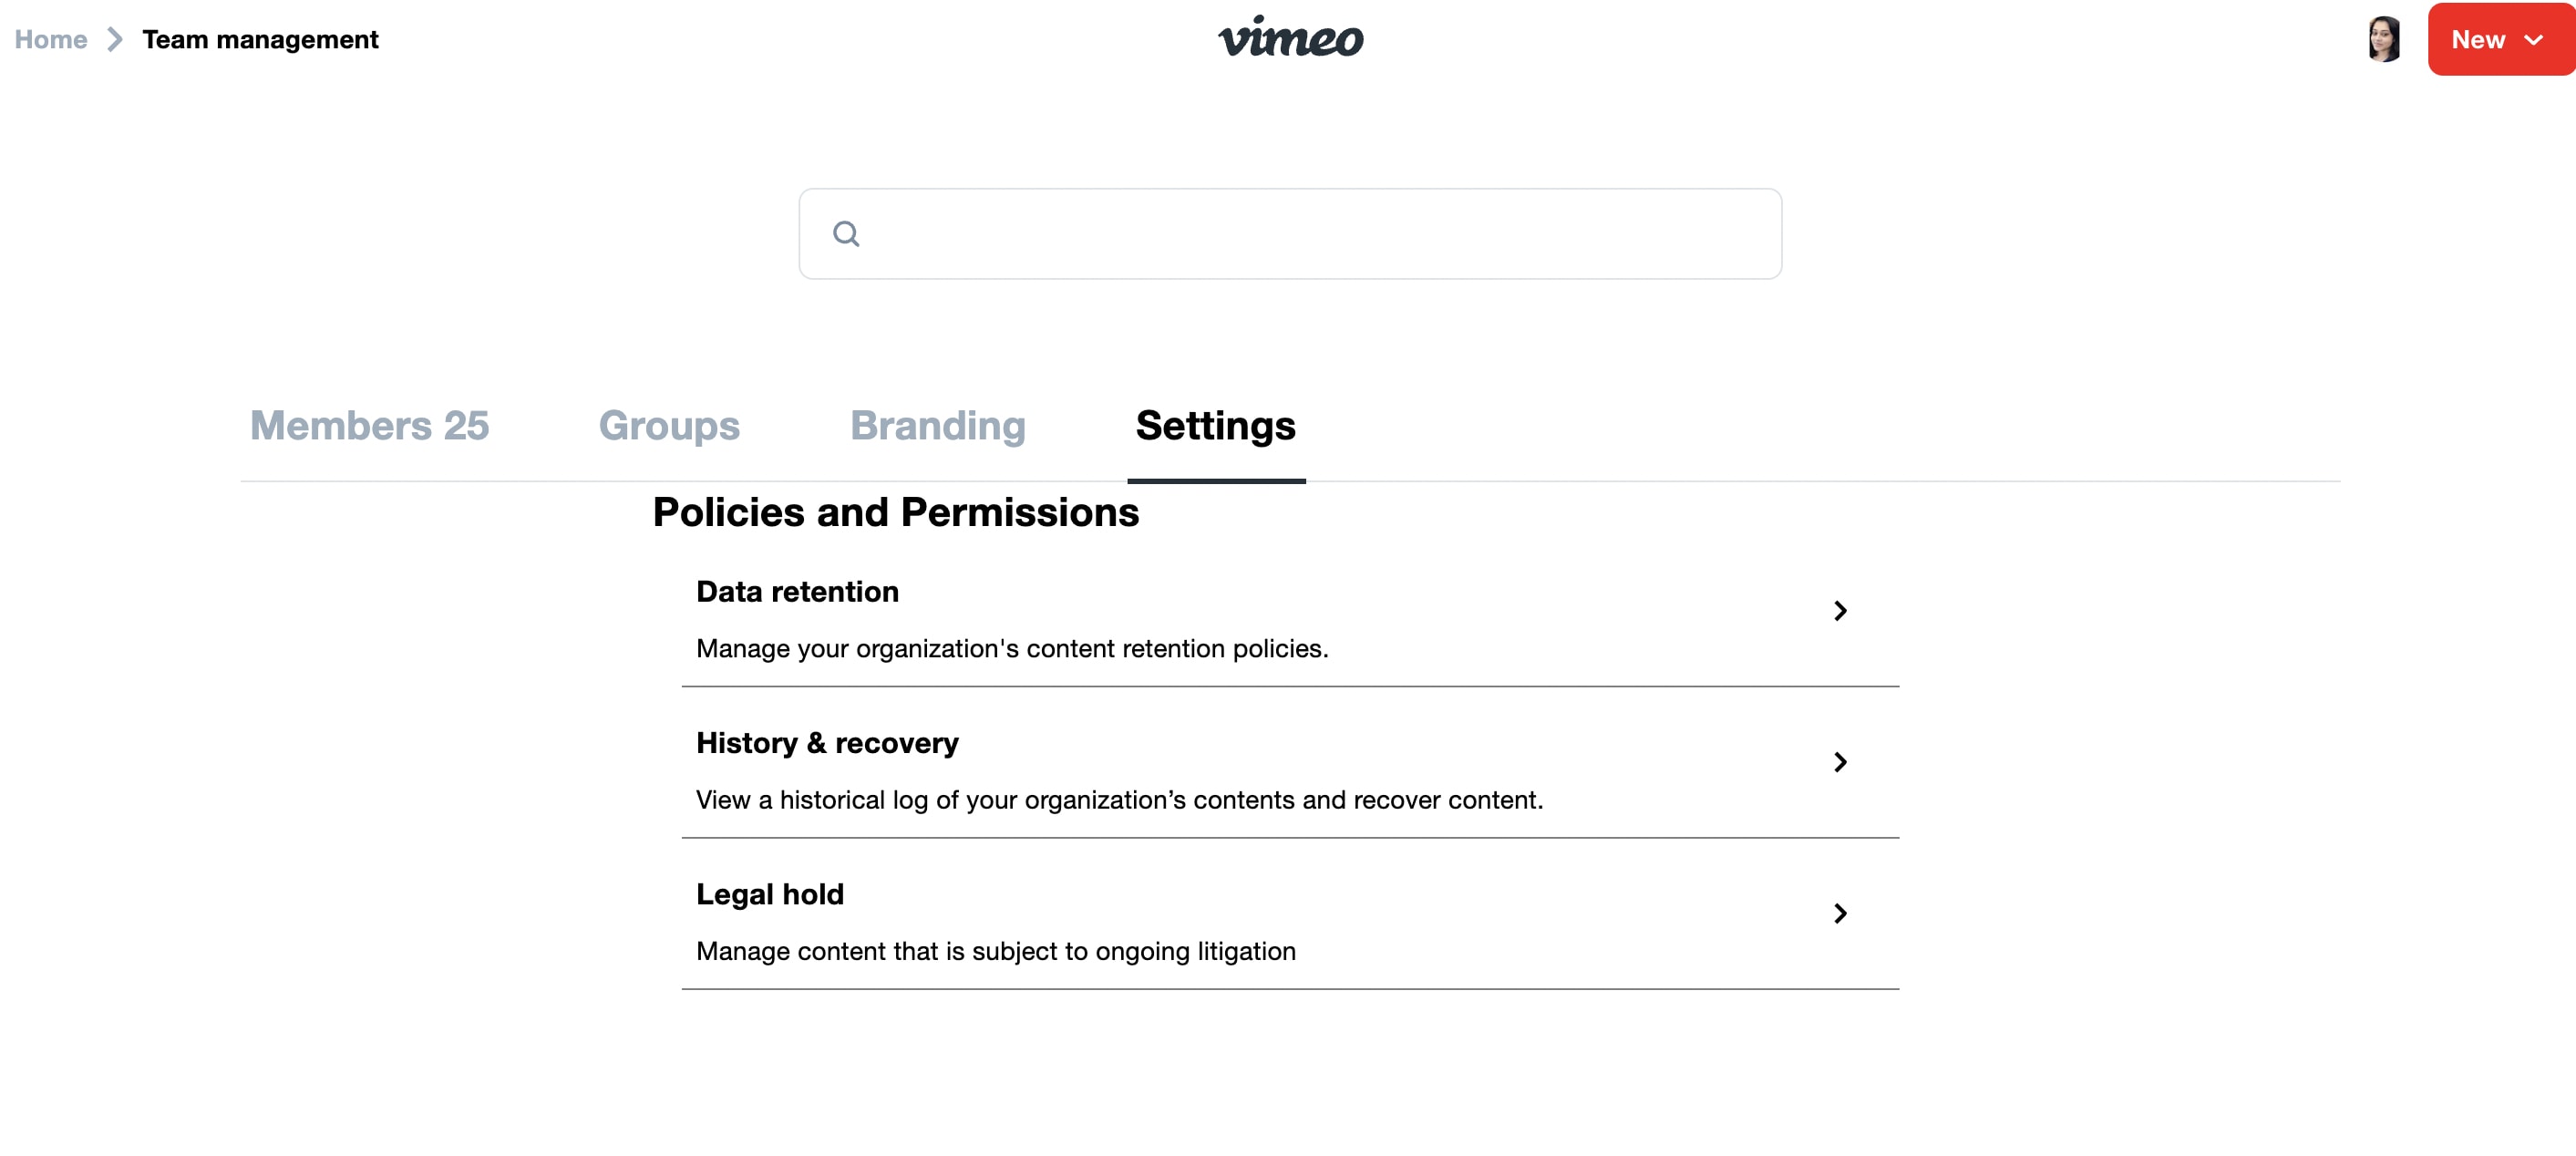 accessing team management settings on vimeo